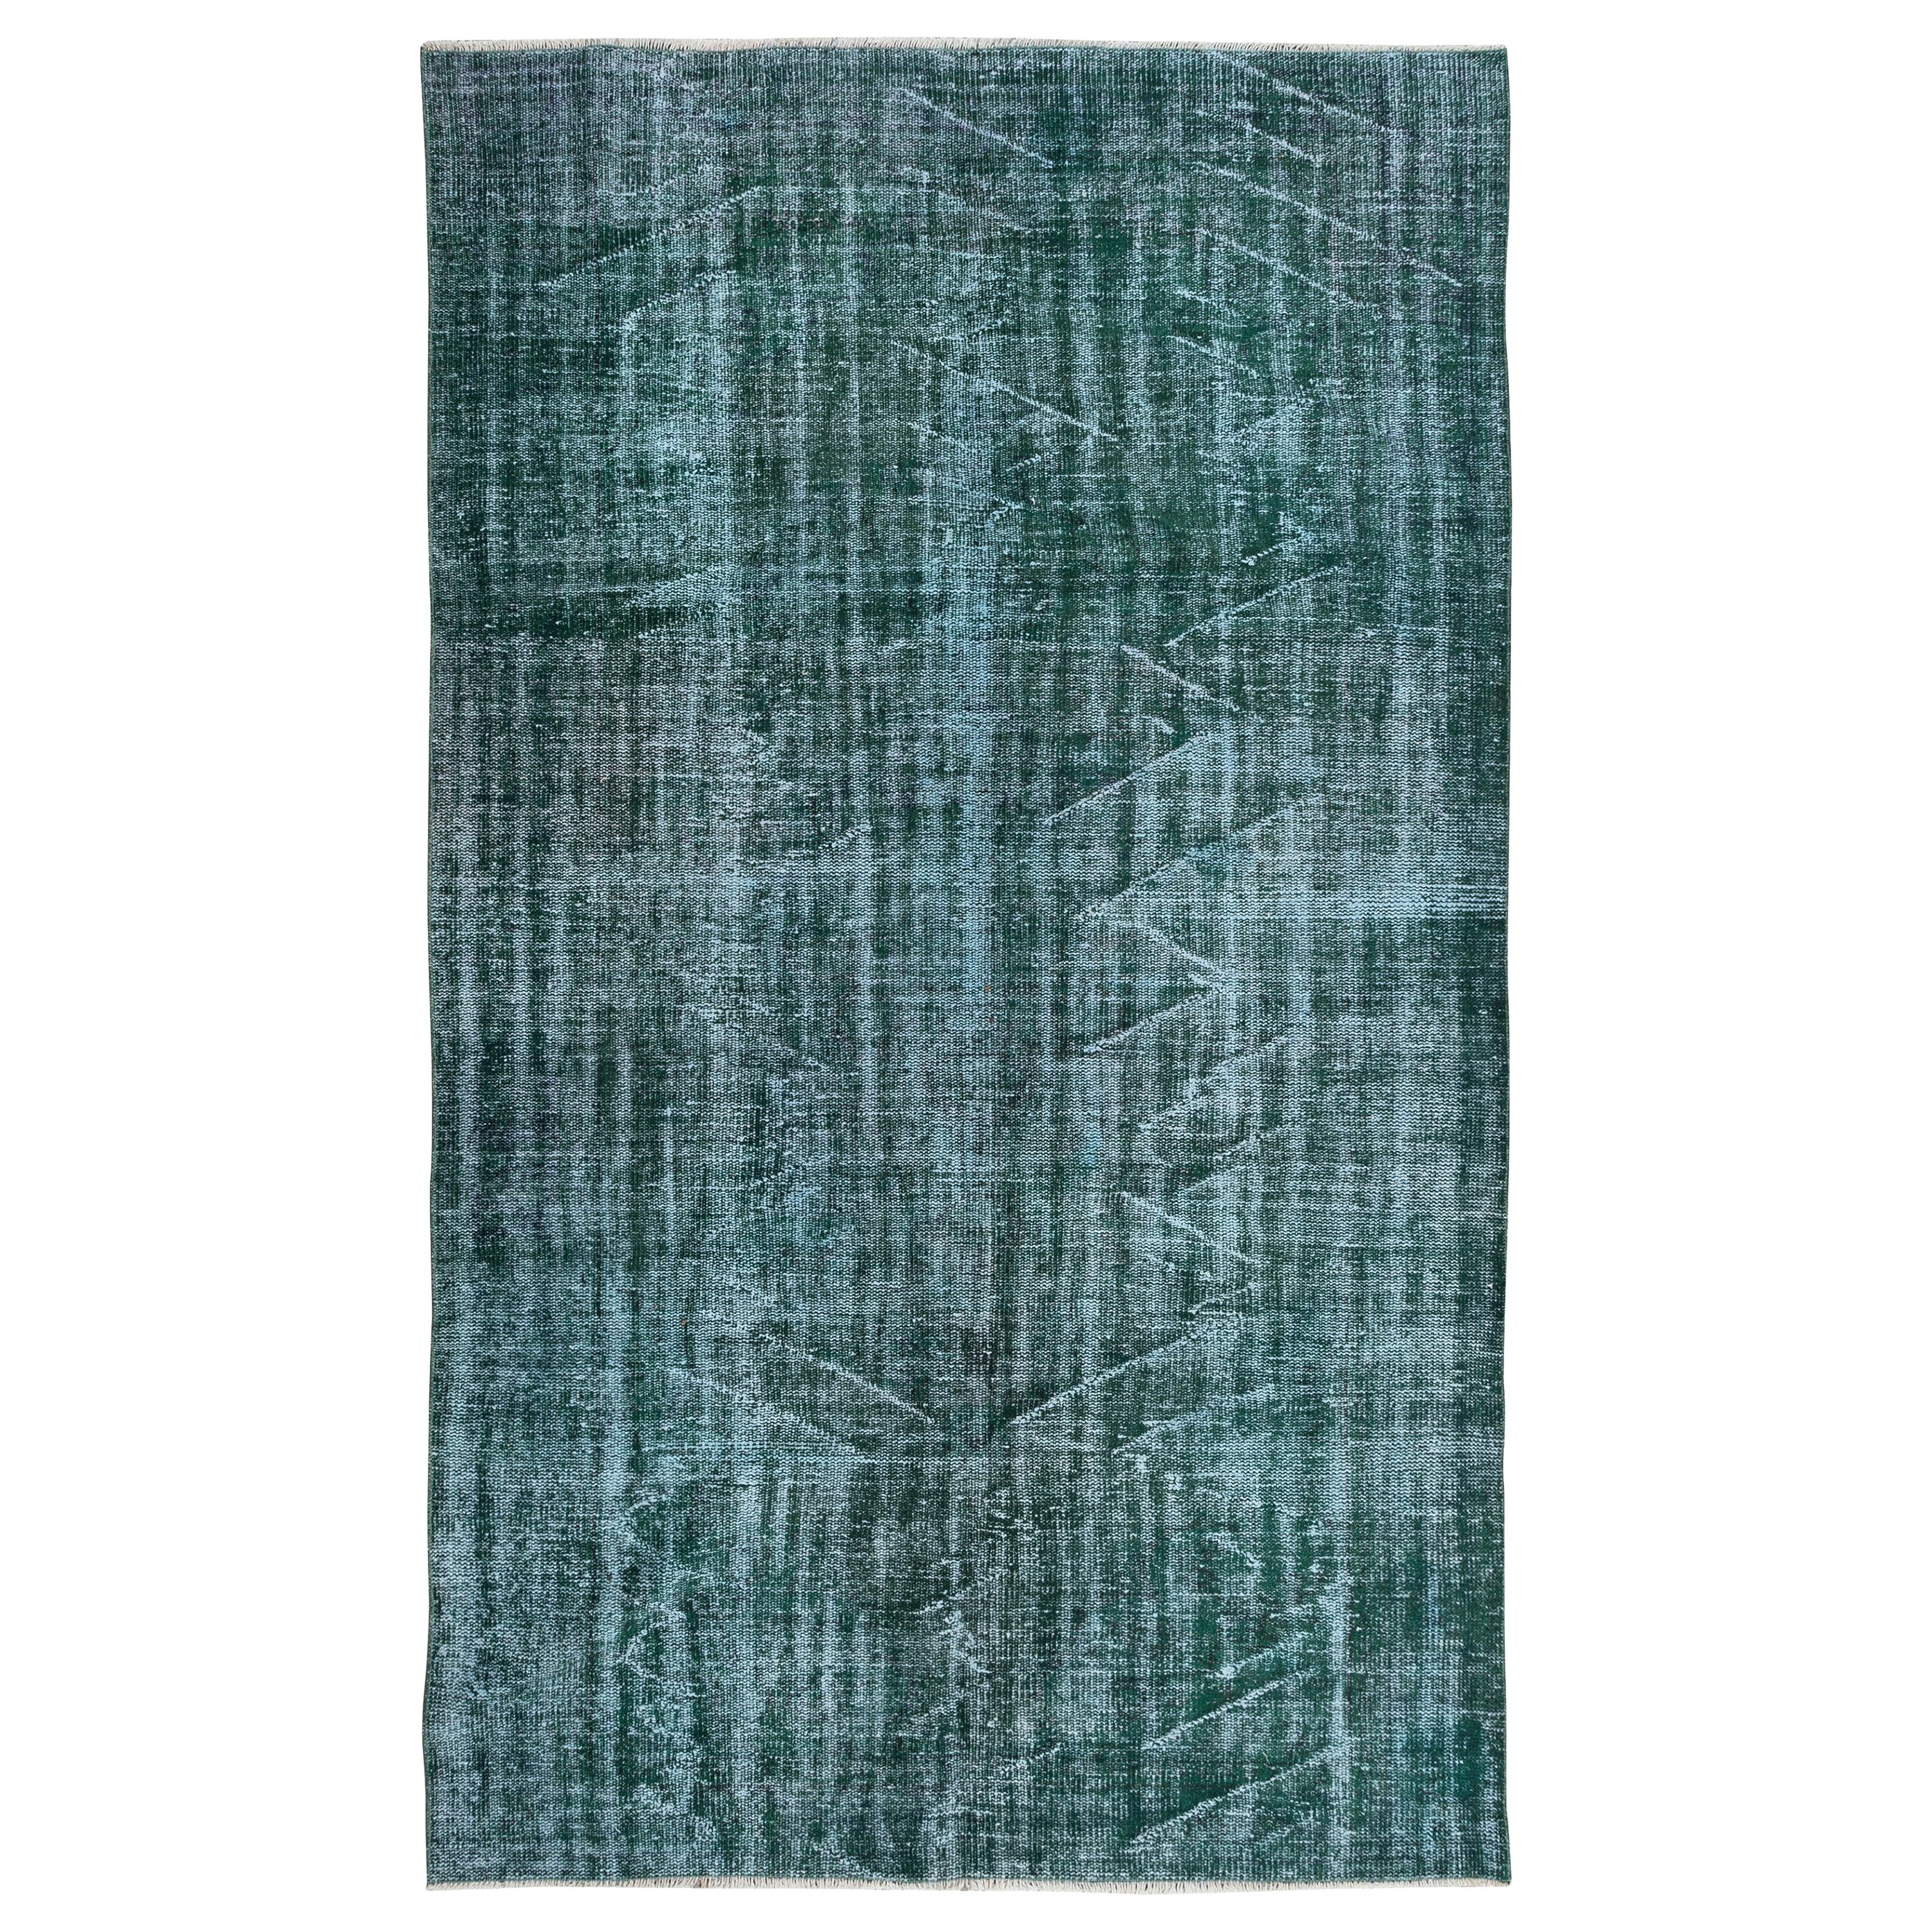 5.2x8.6 Ft Modern Handmade Turkish Green Area Rug with Shabby Chic Style